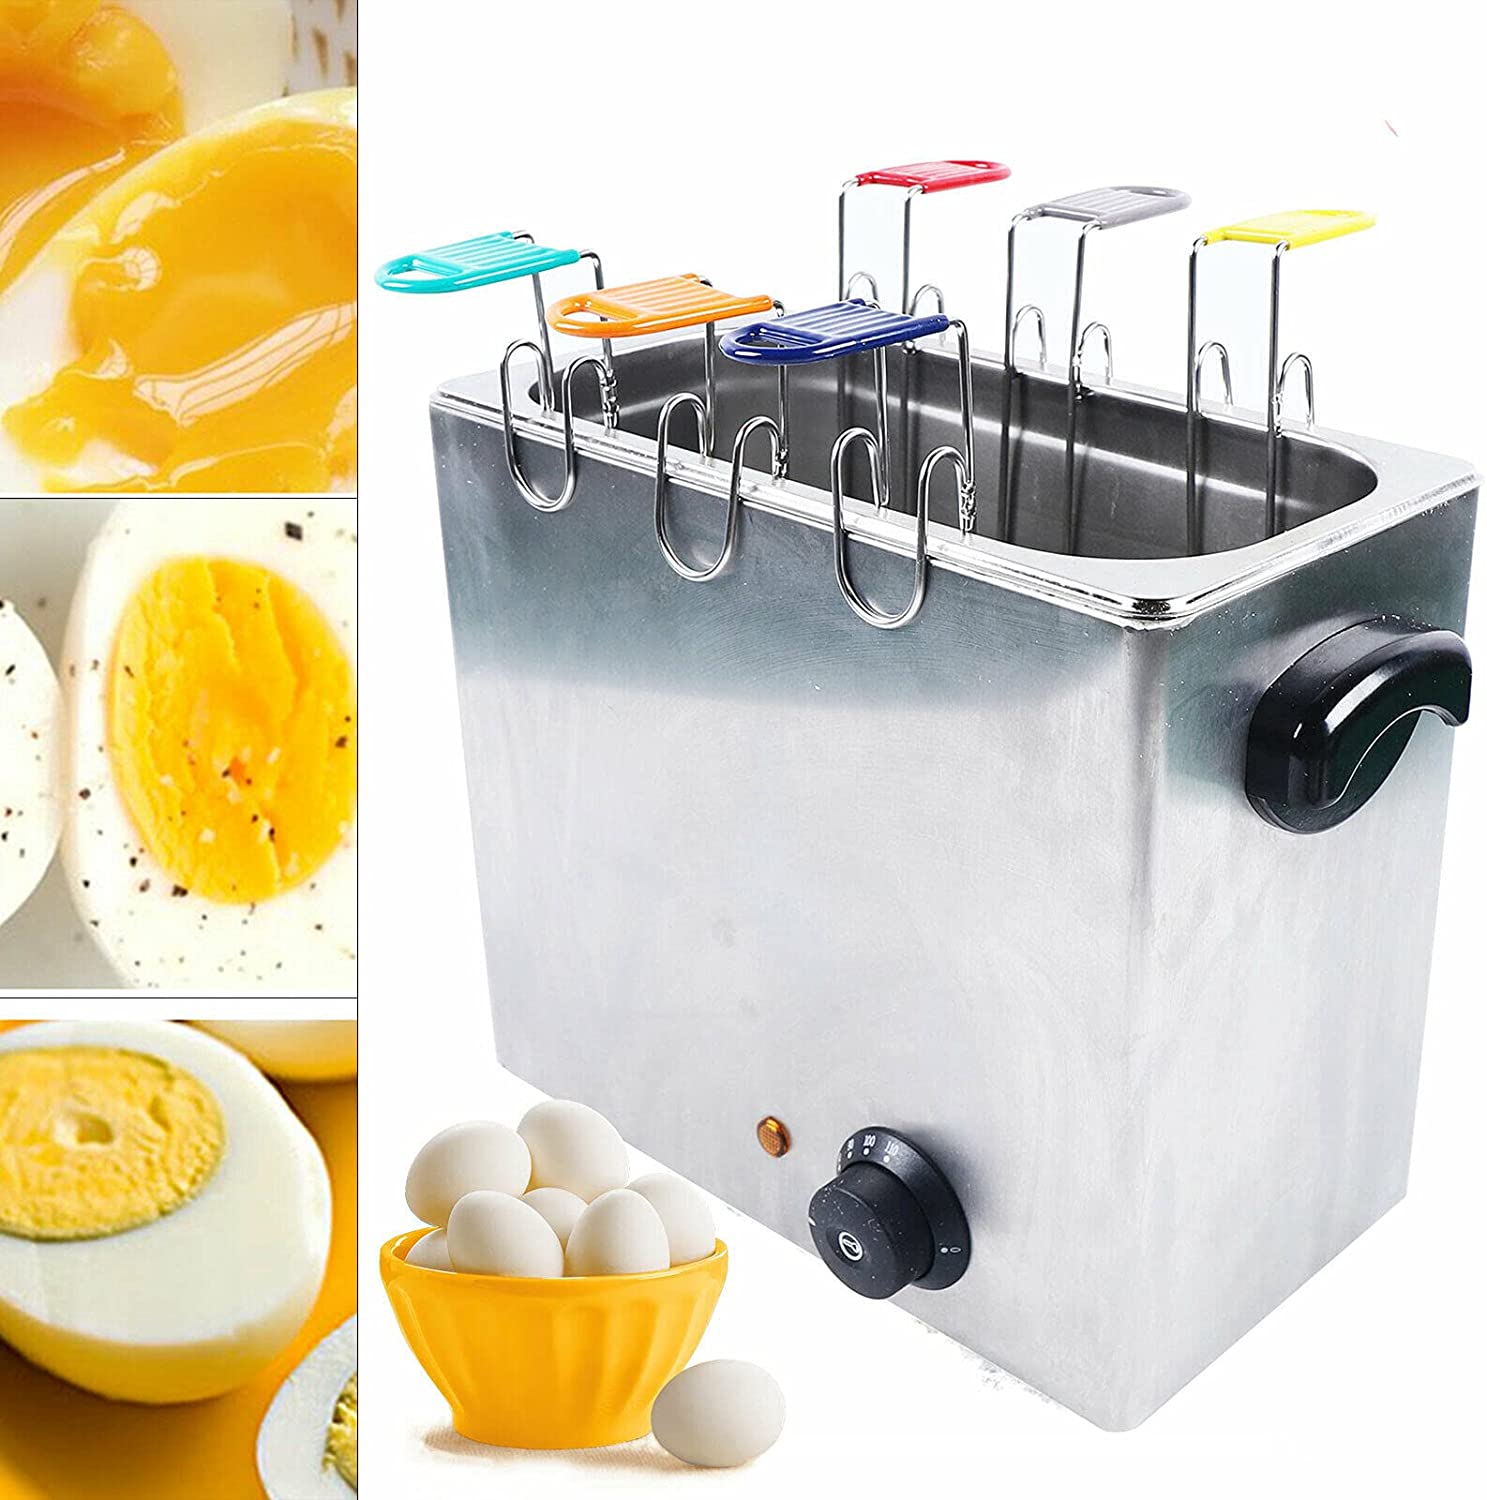 YiWon Electric Egg Cooker Stainless Steel 2600W 30-110°C Egg Boiler Egg Machine Hard Boiled Eggs Stainless Steel with 6 Egg Baskets